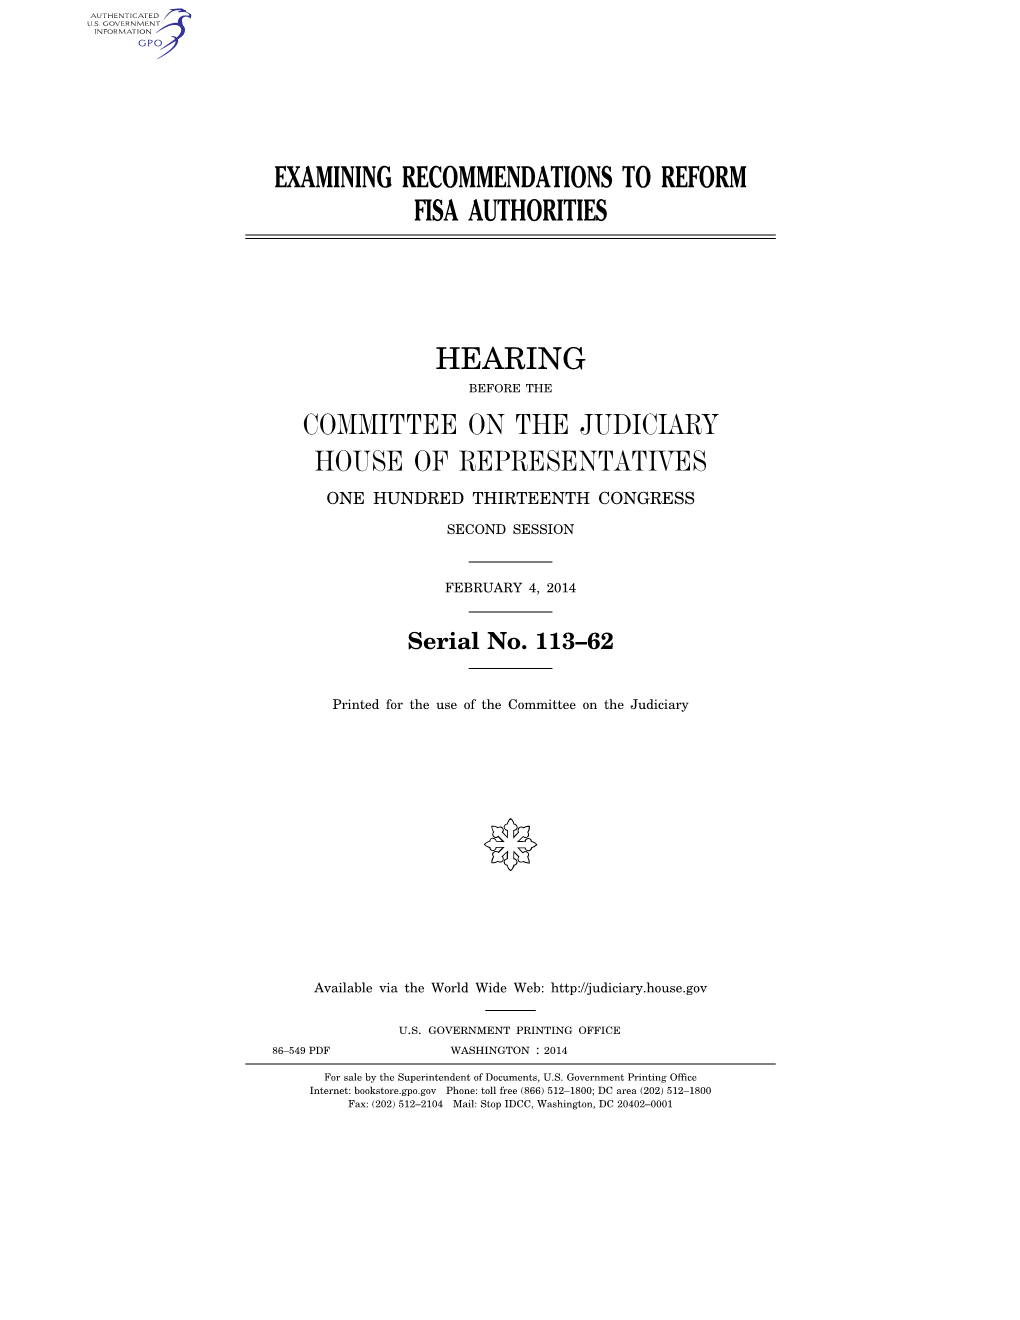 Examining Recommendations to Reform Fisa Authorities Hearing